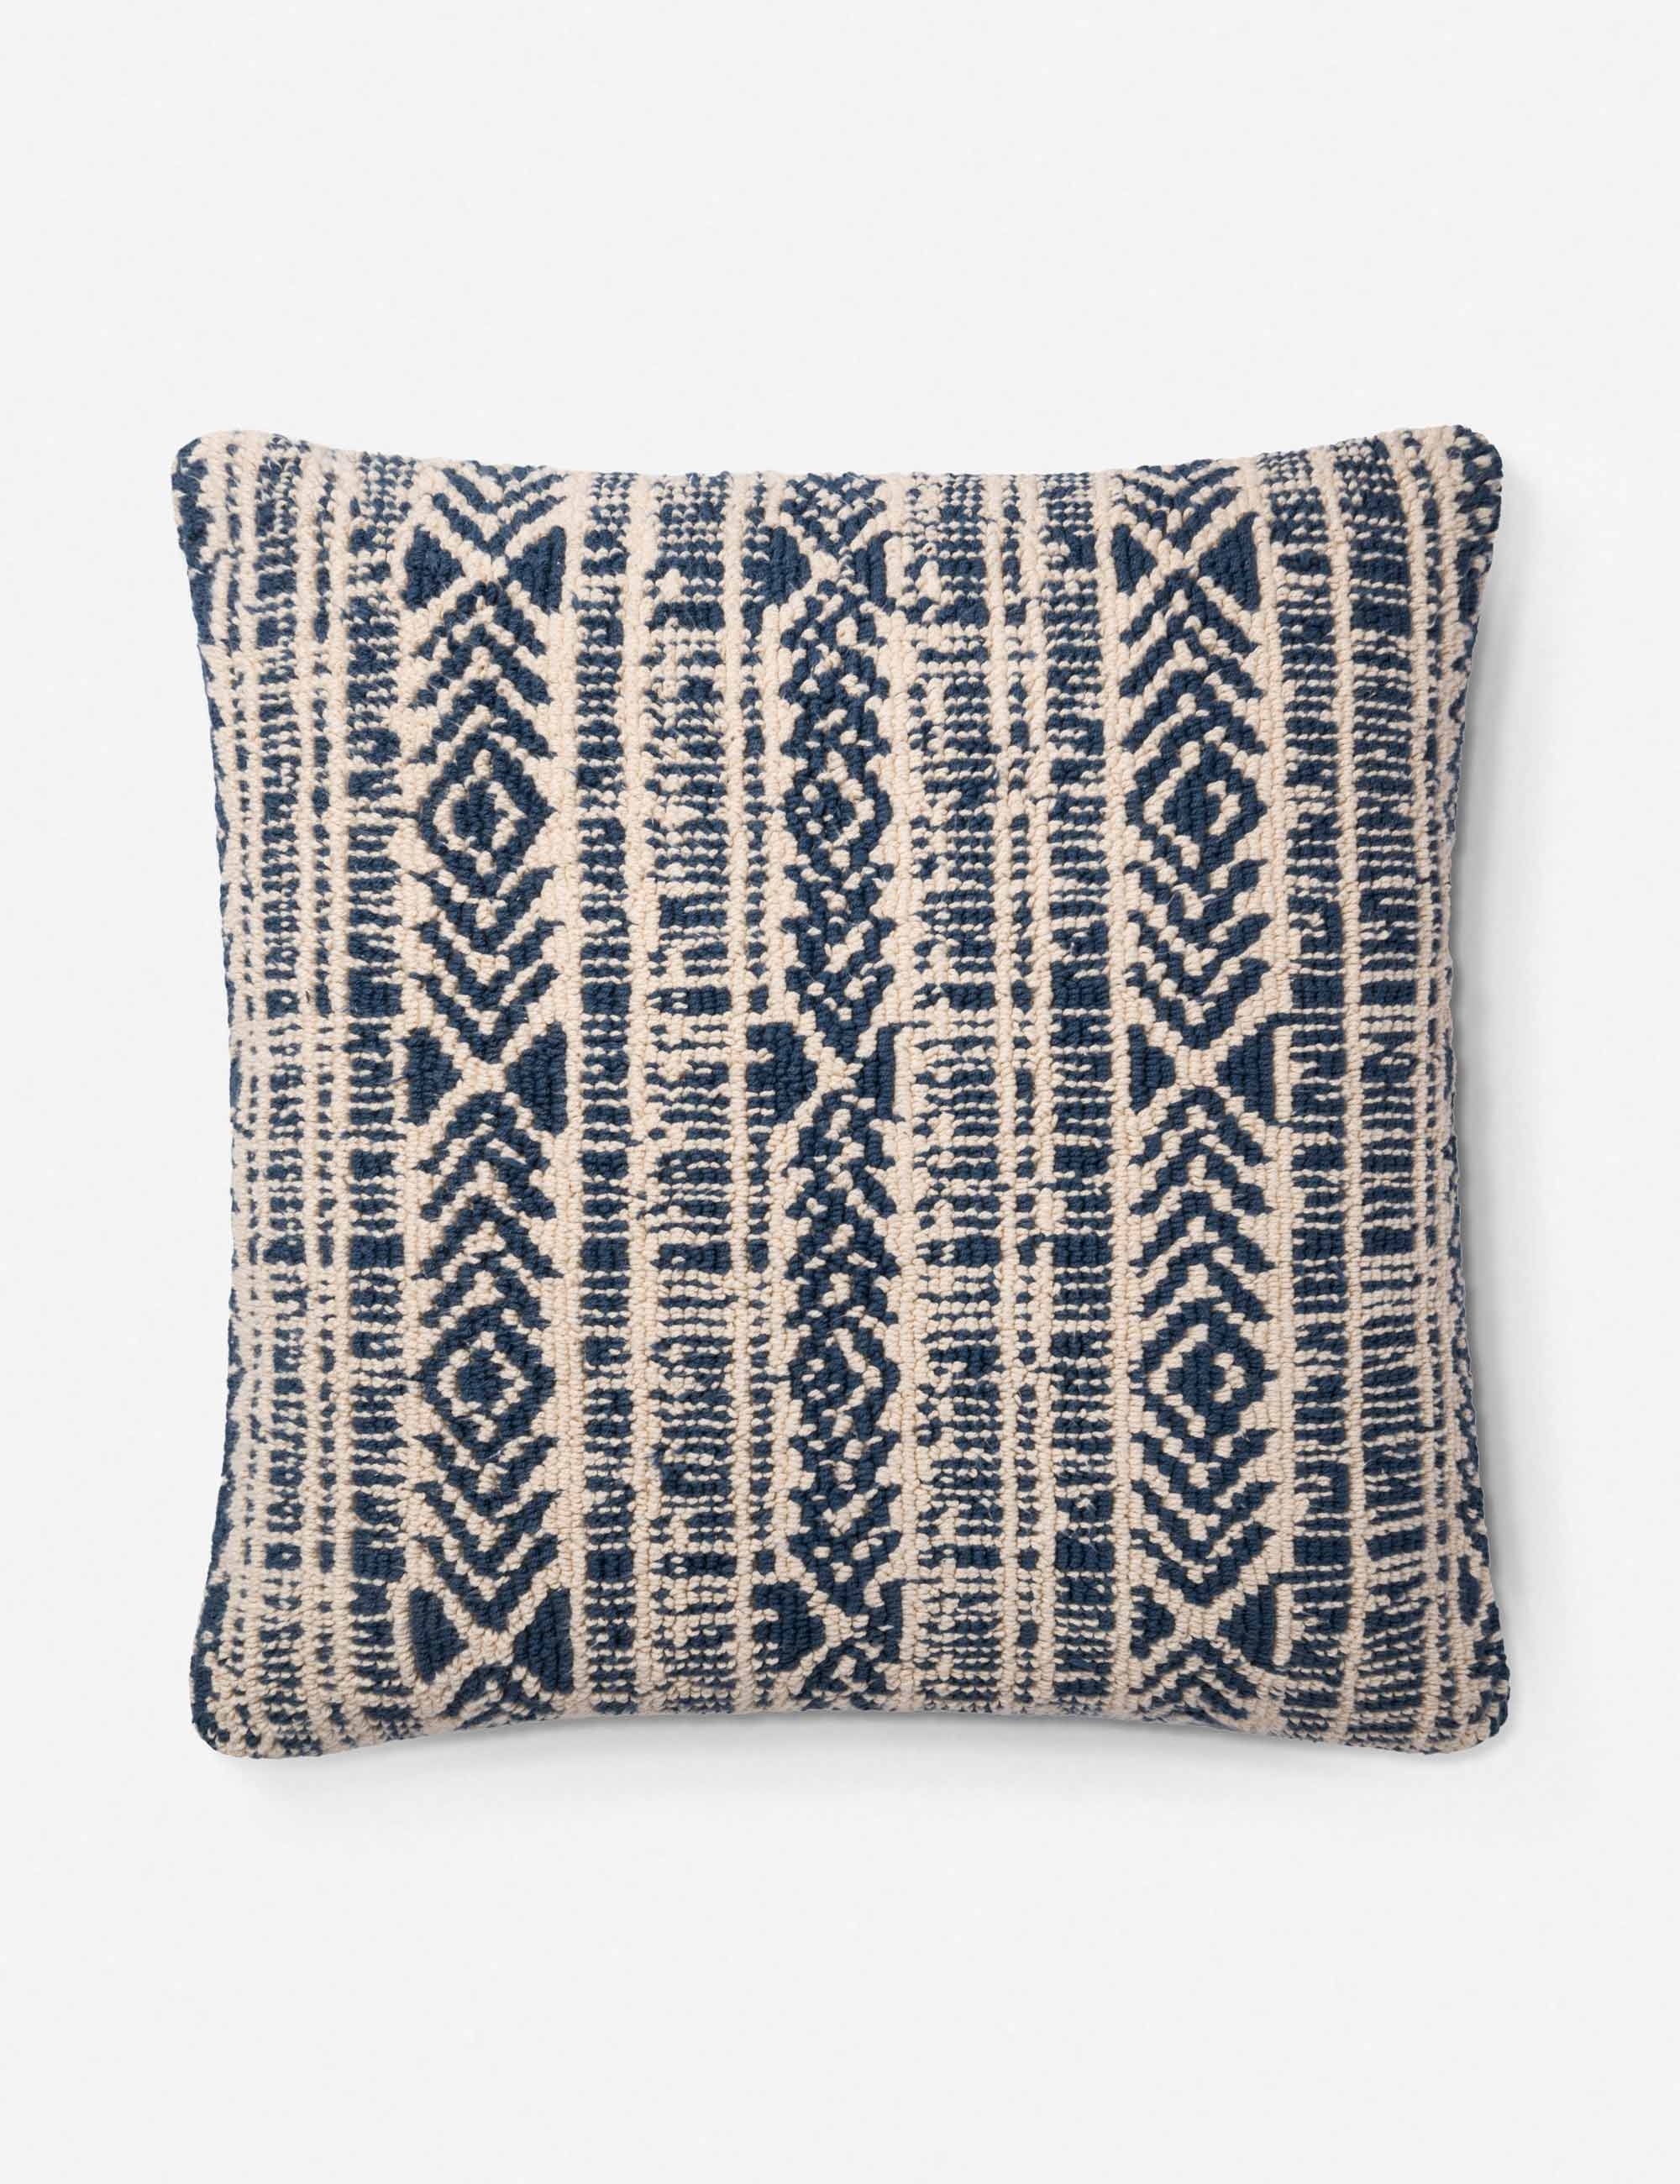 Ione Pillow, Navy and Ivory 22" x 22" - Image 0